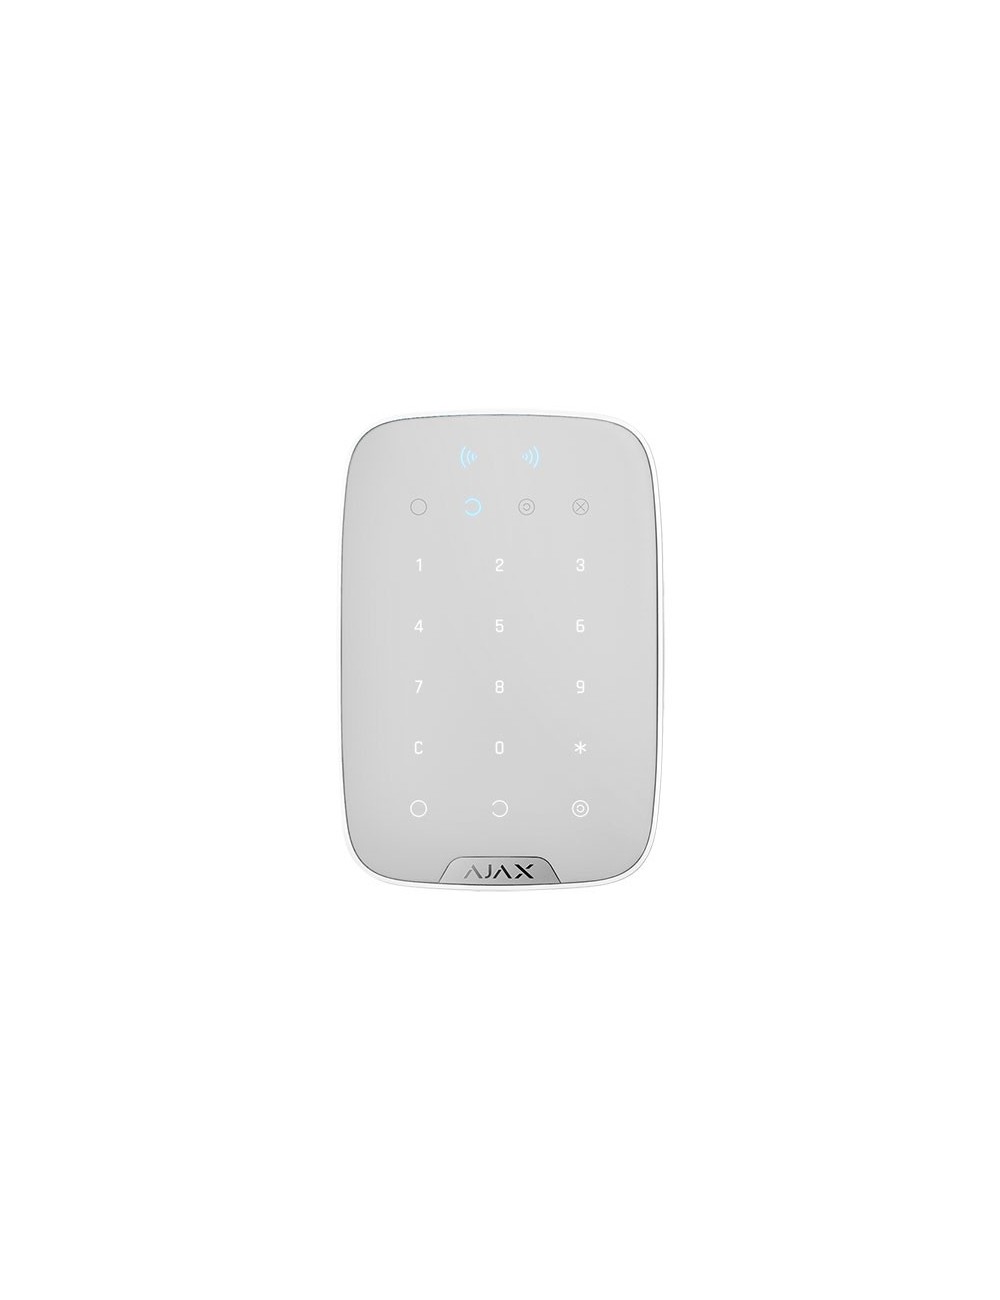 KeyPad Plus supporting contactless cards and key fobs Ajax white